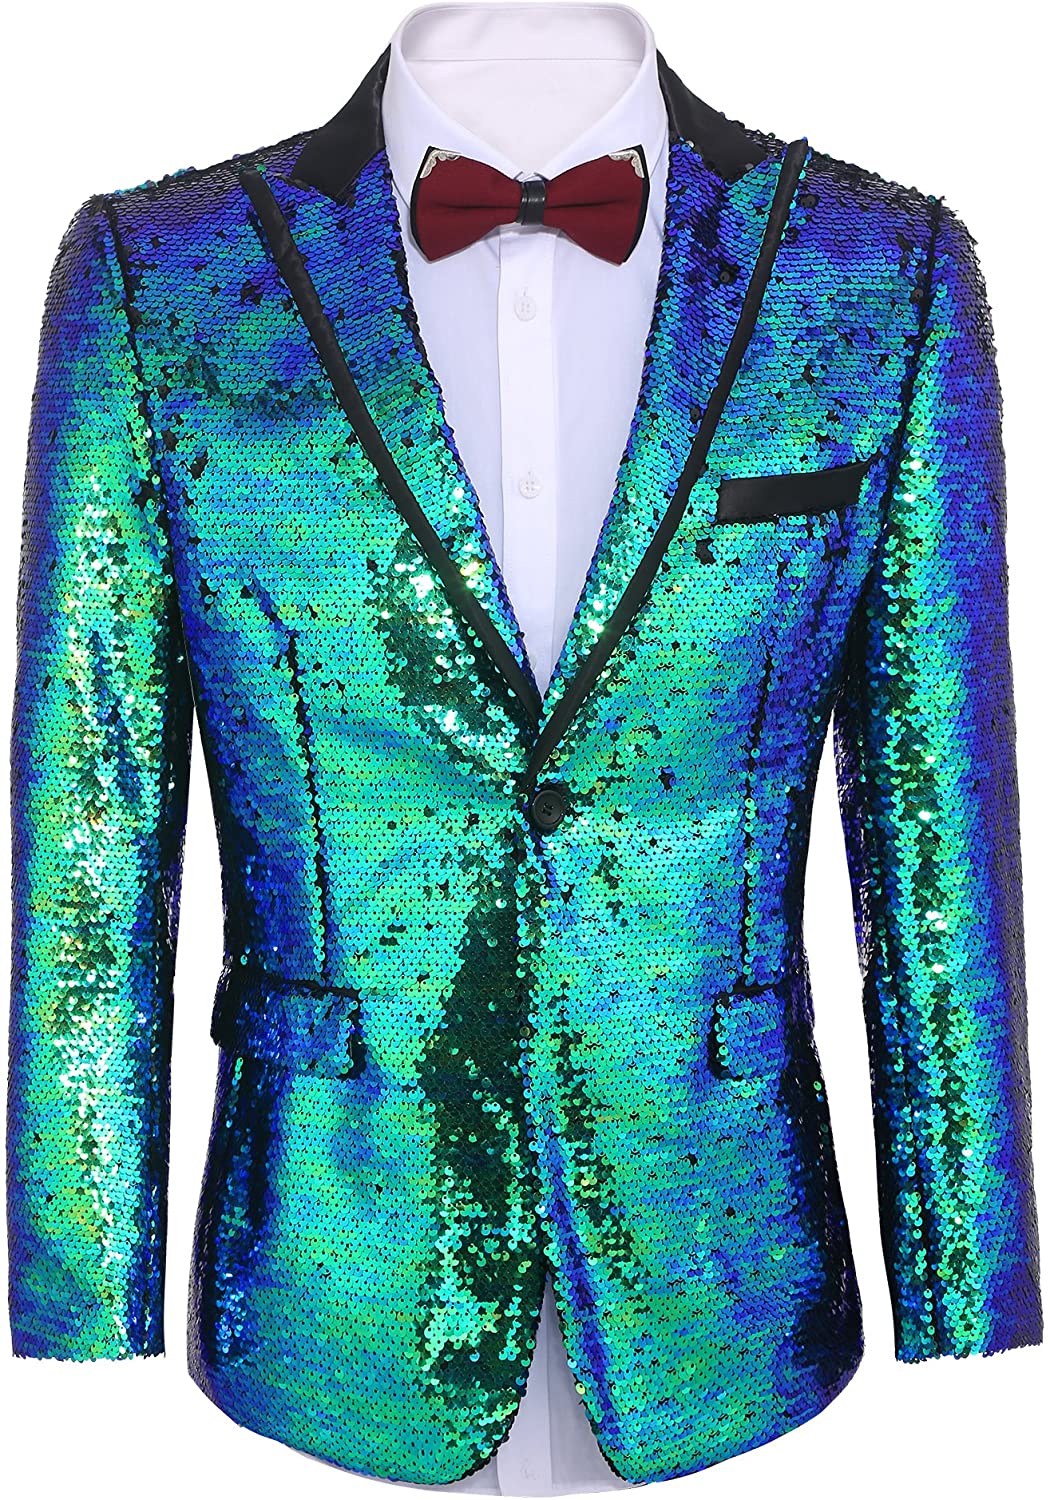 COOFANDY Men's Shiny Sequins Suit Jacket Blazer One Button Tuxedo for Party,Wedding,Banquet,Prom 